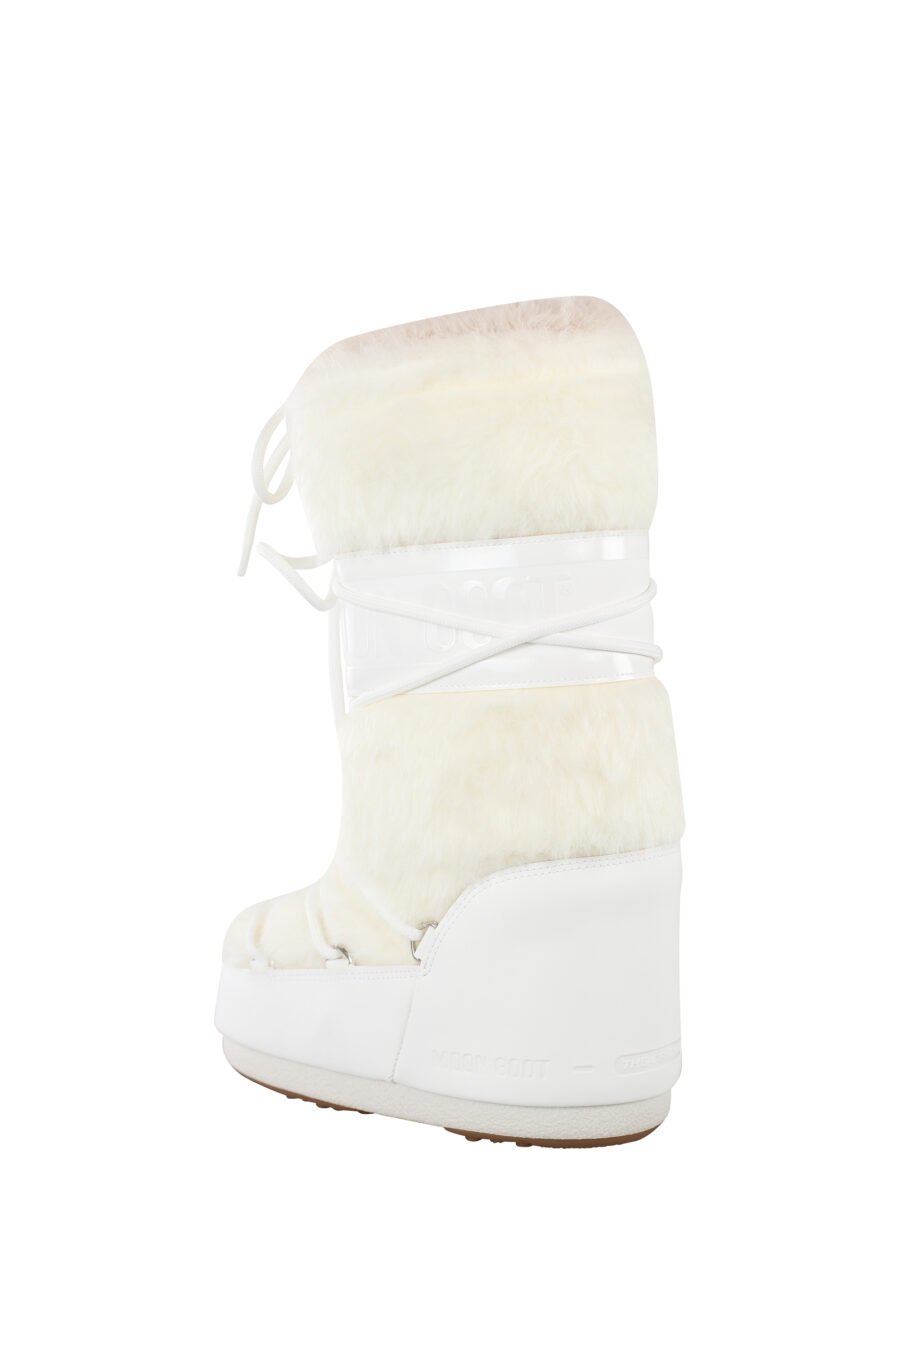 White snow boots with monochrome logo - IMG 6809